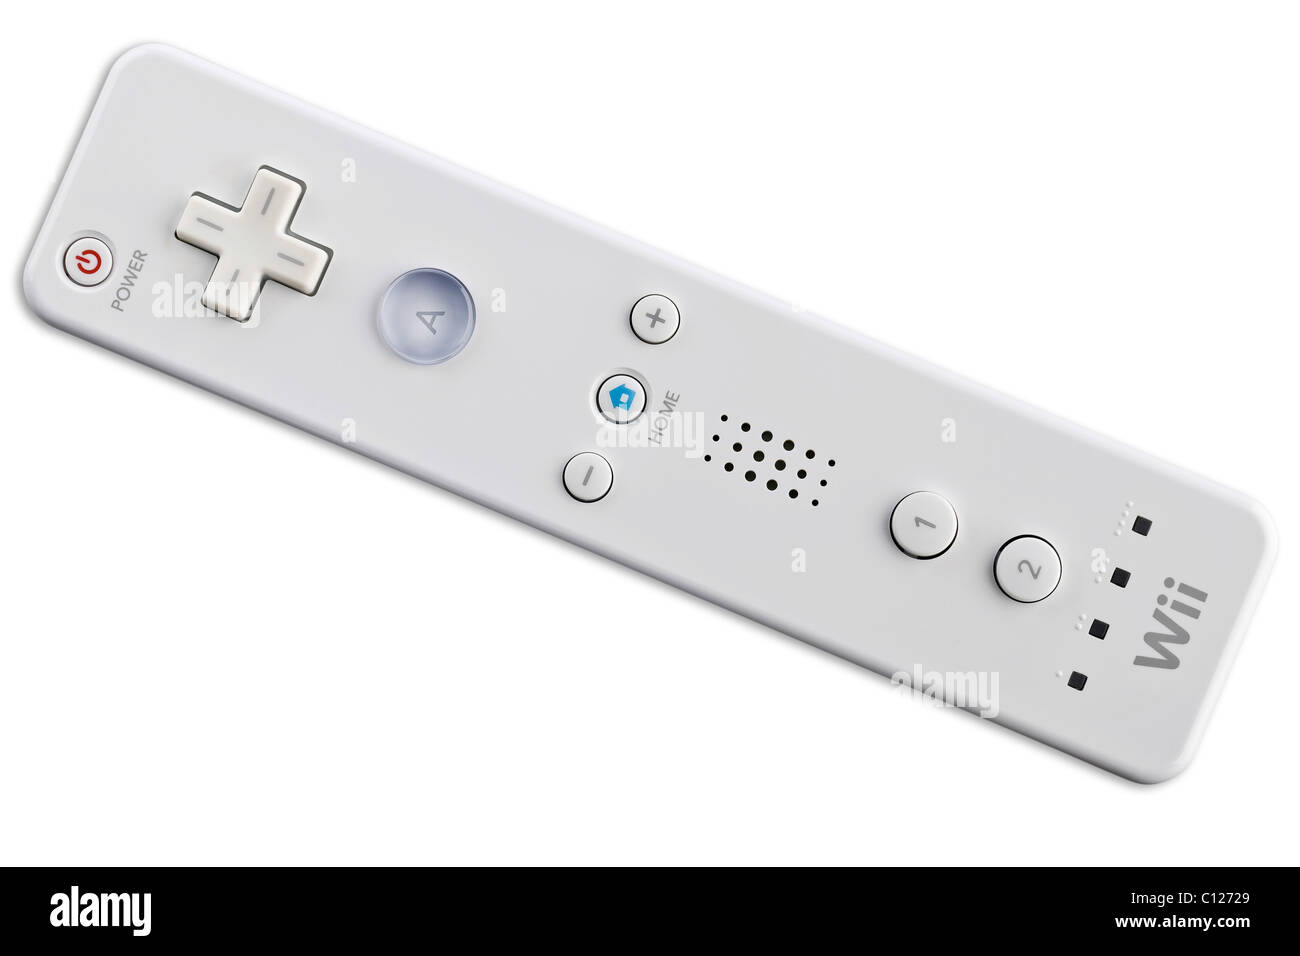 Wii Remote, Wiimote, controller for Nintendo's Wii console Stock Photo -  Alamy